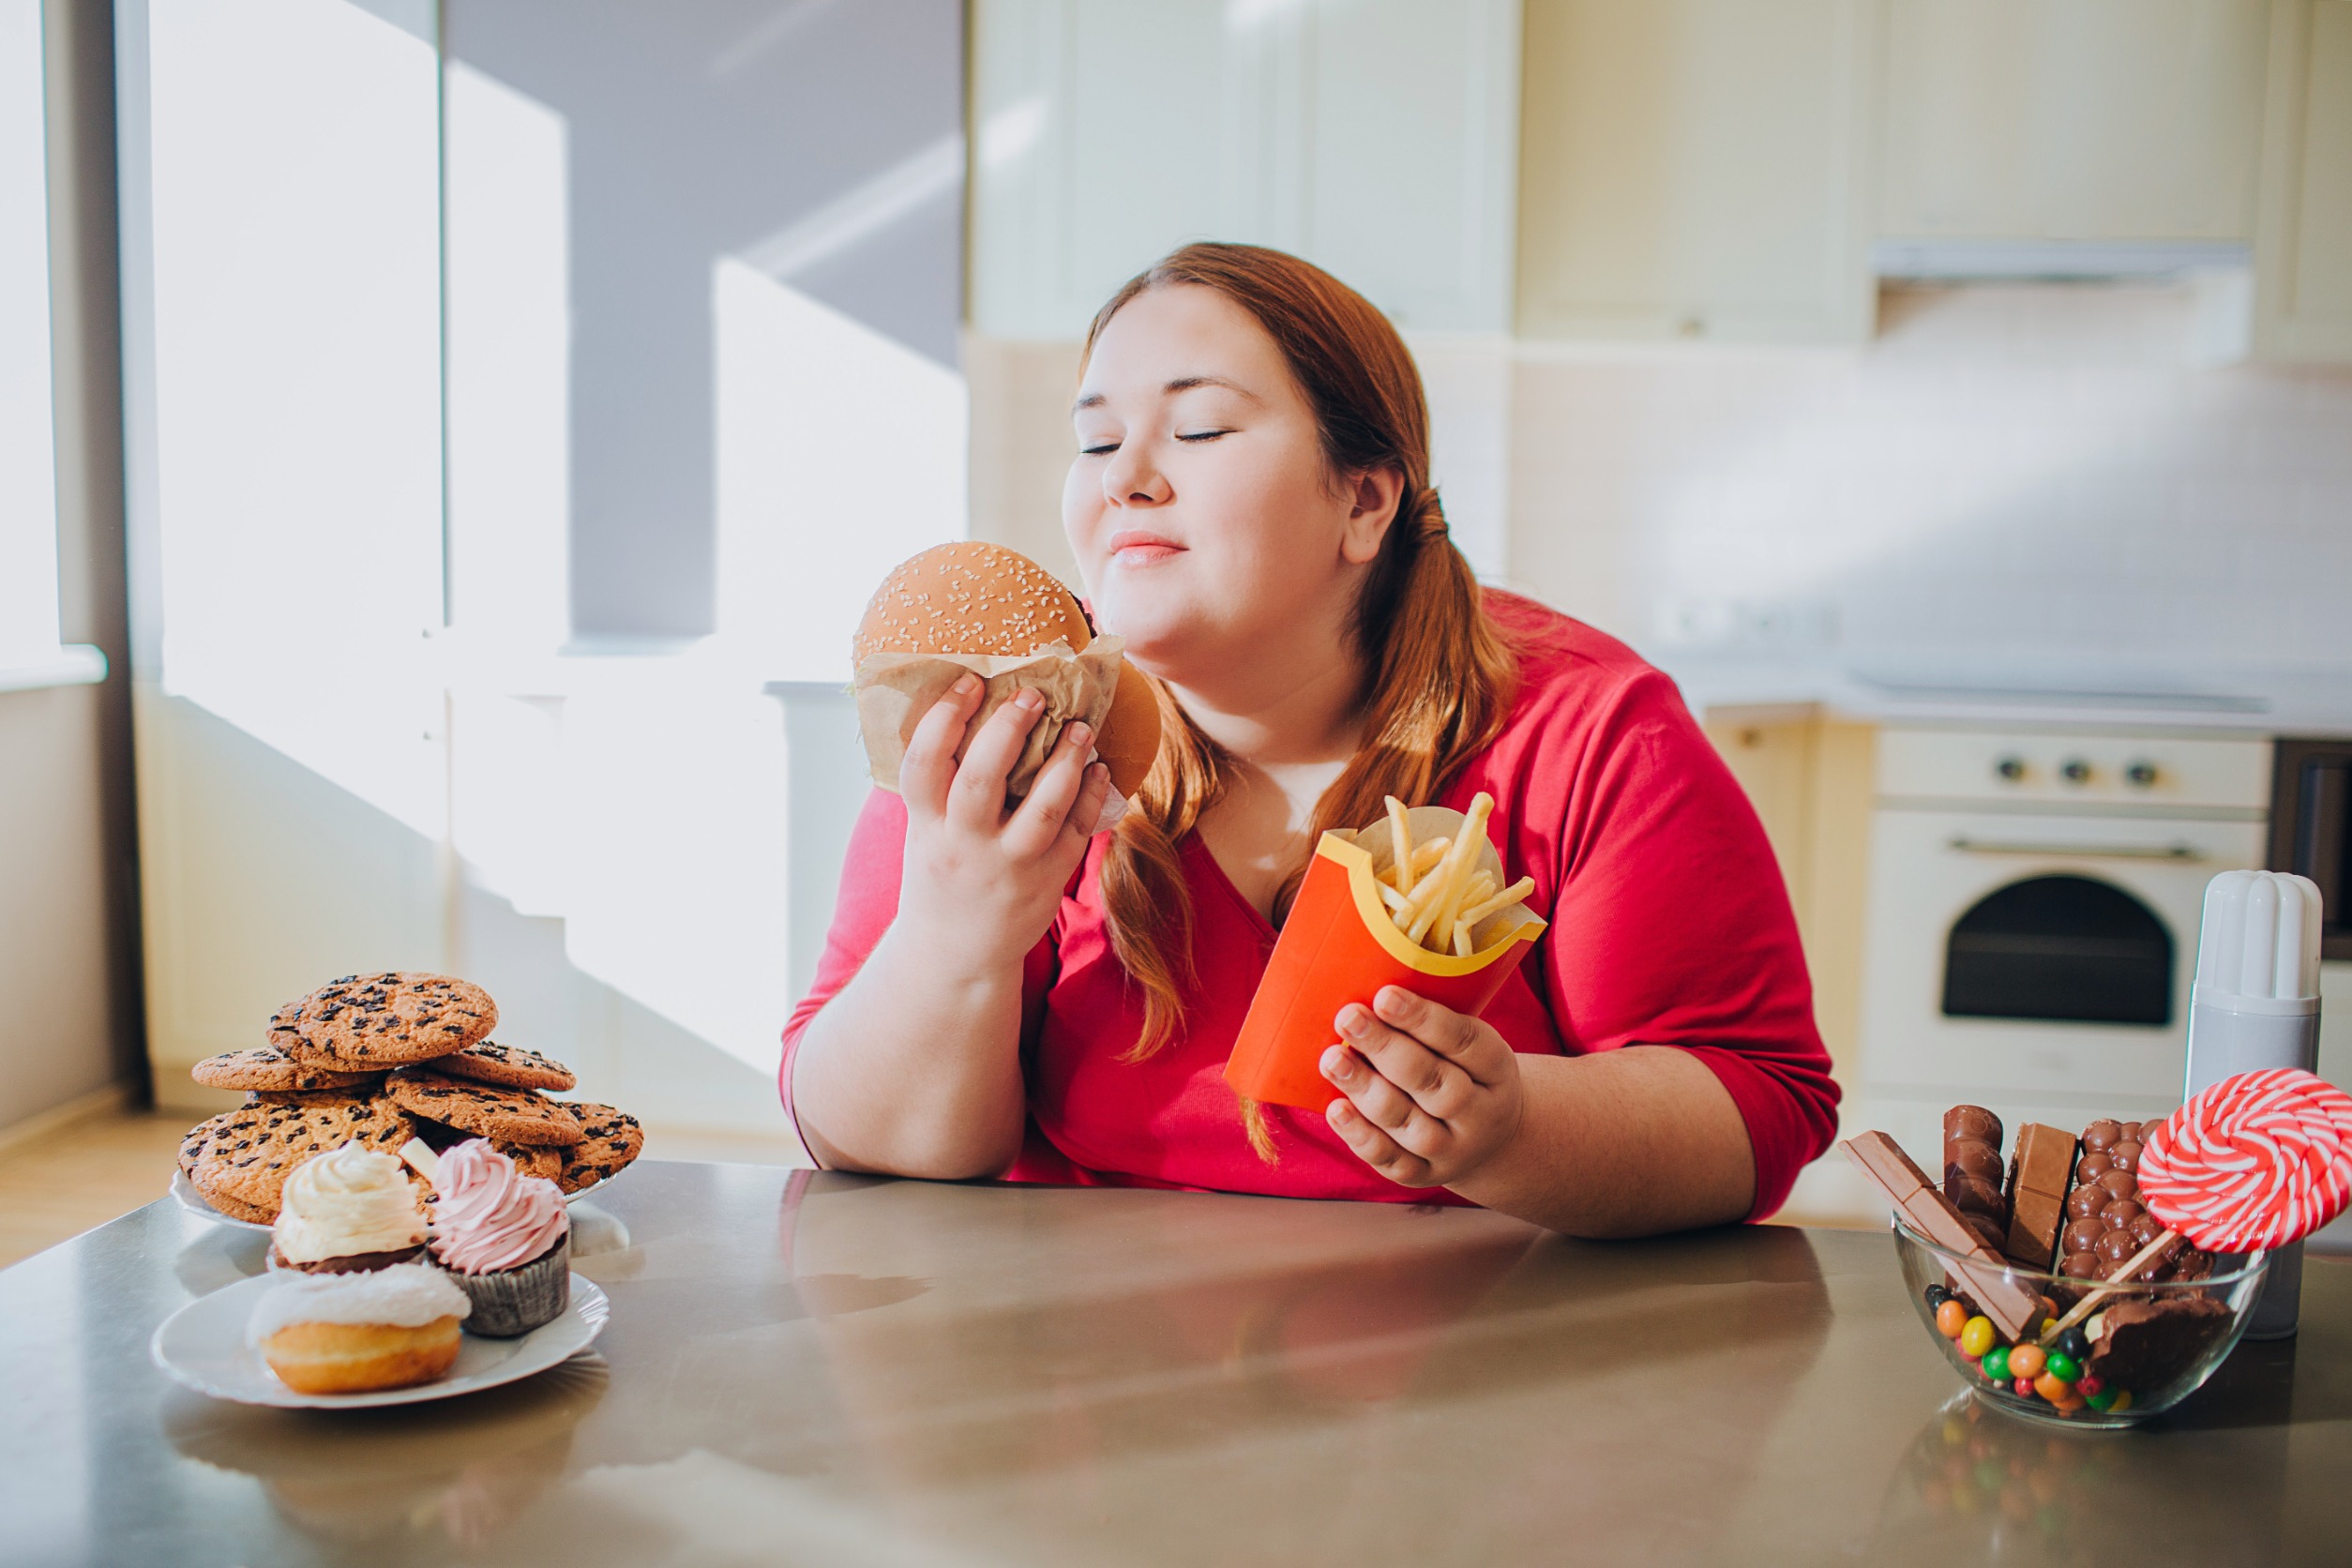 <p>Eating while distracted, such as watching TV or working, can lead to mindless eating and overconsumption of calories. It's easy to lose track of how much you've eaten when your attention is divided. Practicing mindful eating, focusing on your meal without distractions, and savoring each bite can help you recognize hunger and fullness cues, leading to better portion control and weight management. </p> :: 123rf